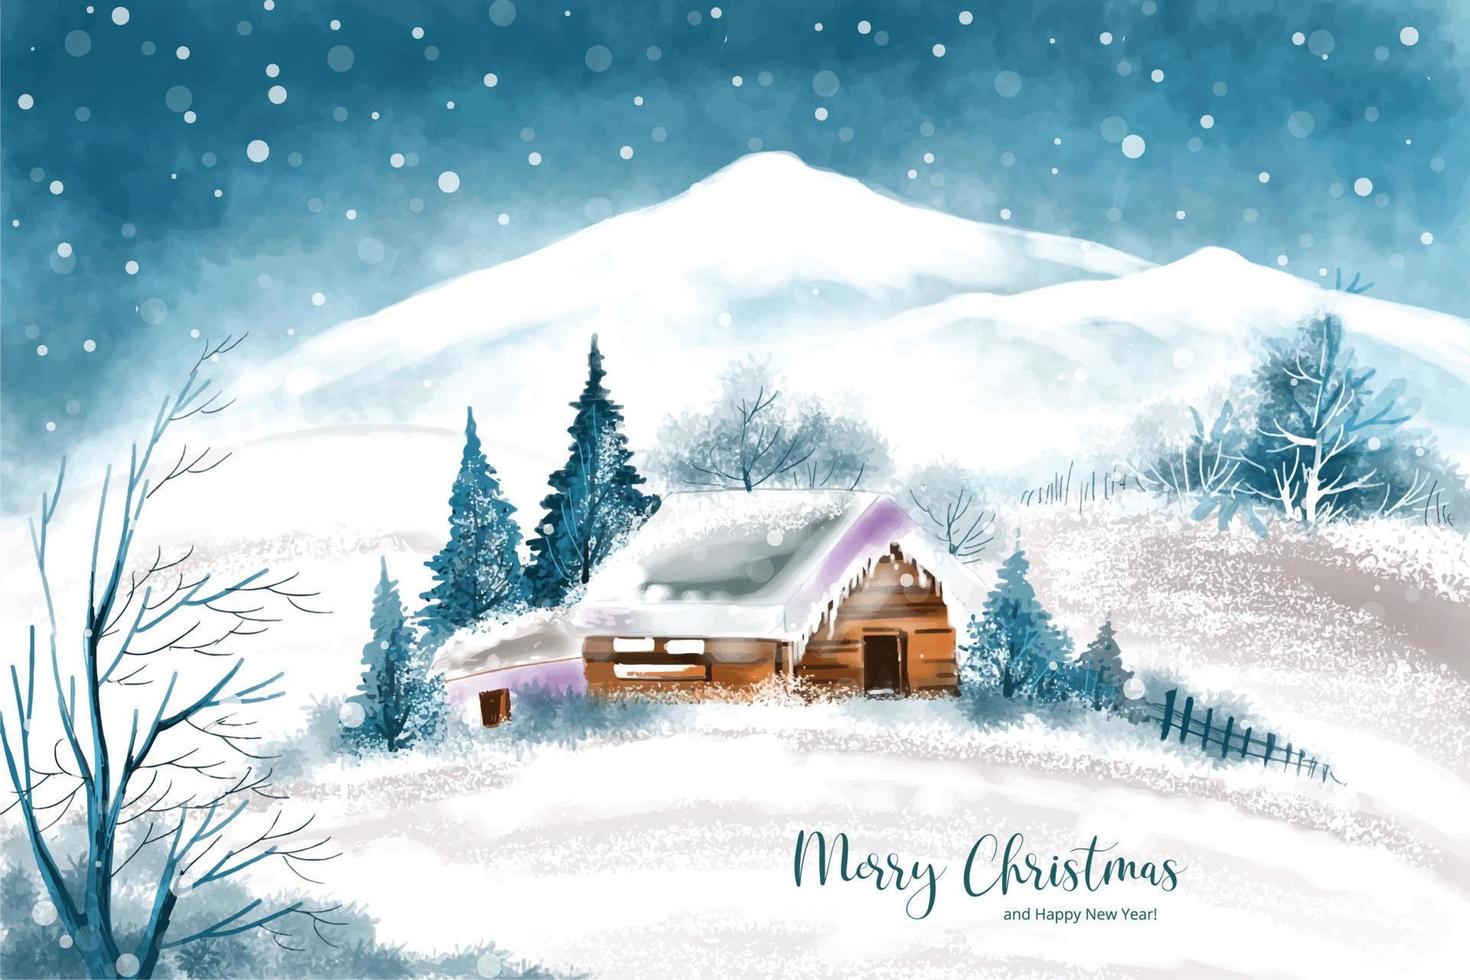 Beautiful winter landscape with house in snowy christmas card background vector